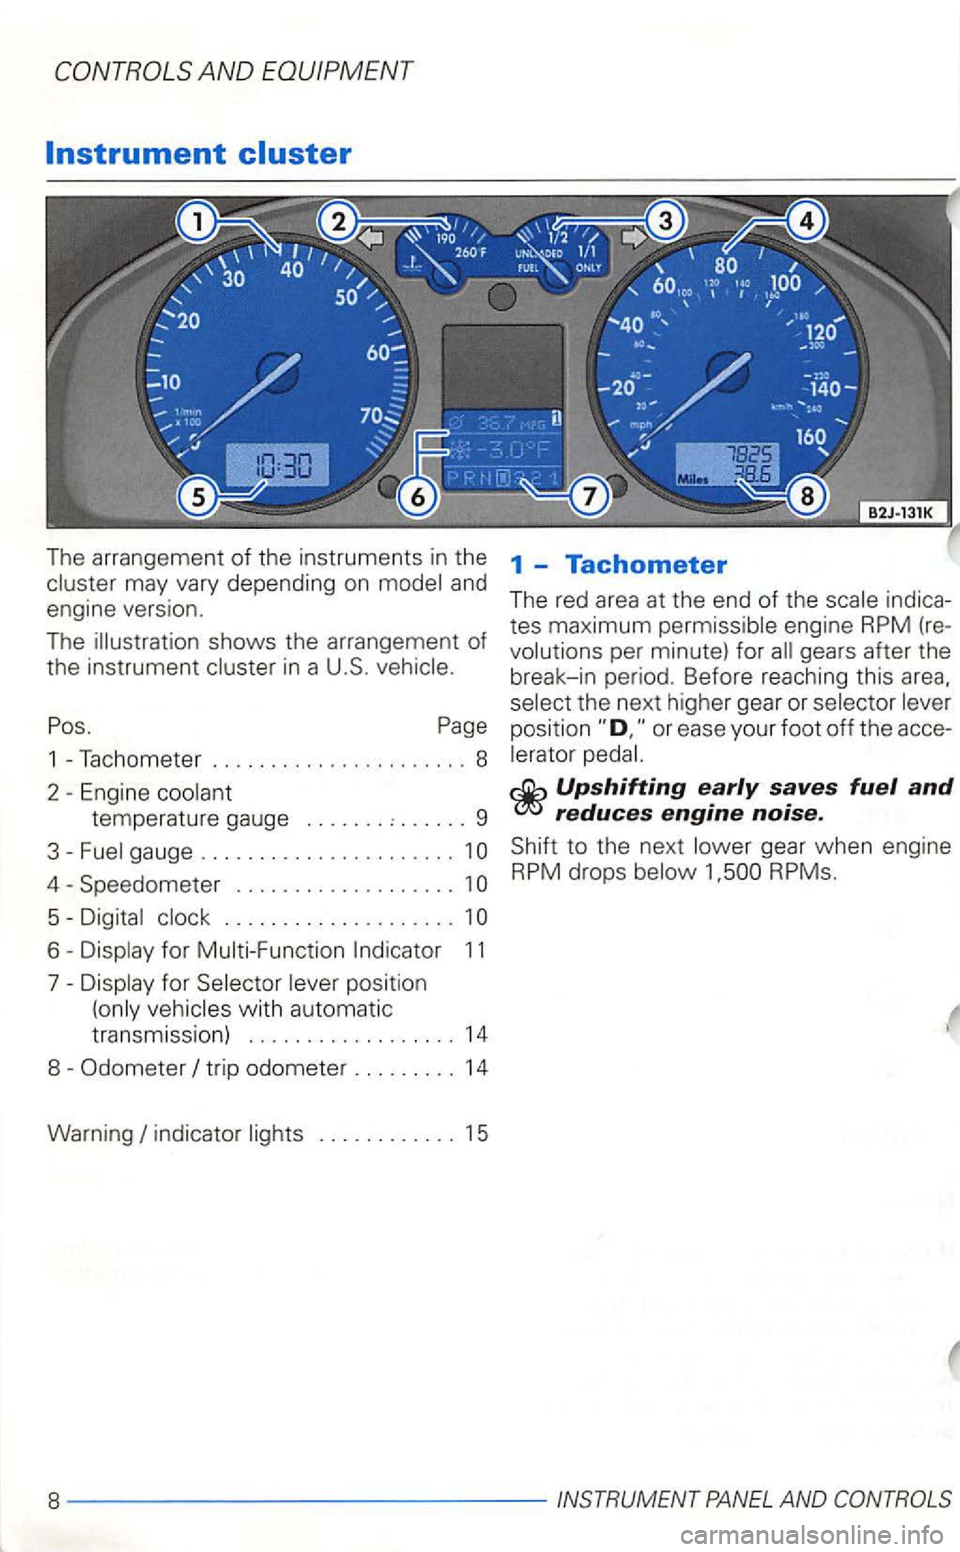 VOLKSWAGEN GOLF 1998  Owners Manual The arrangement of the instruments  in the may  vary depending  on model and engine  version. 
The  illustration  shows the arrangement 
of the instrumen t in a U.S. 
Pos. Page 
1 -Tachometer ........